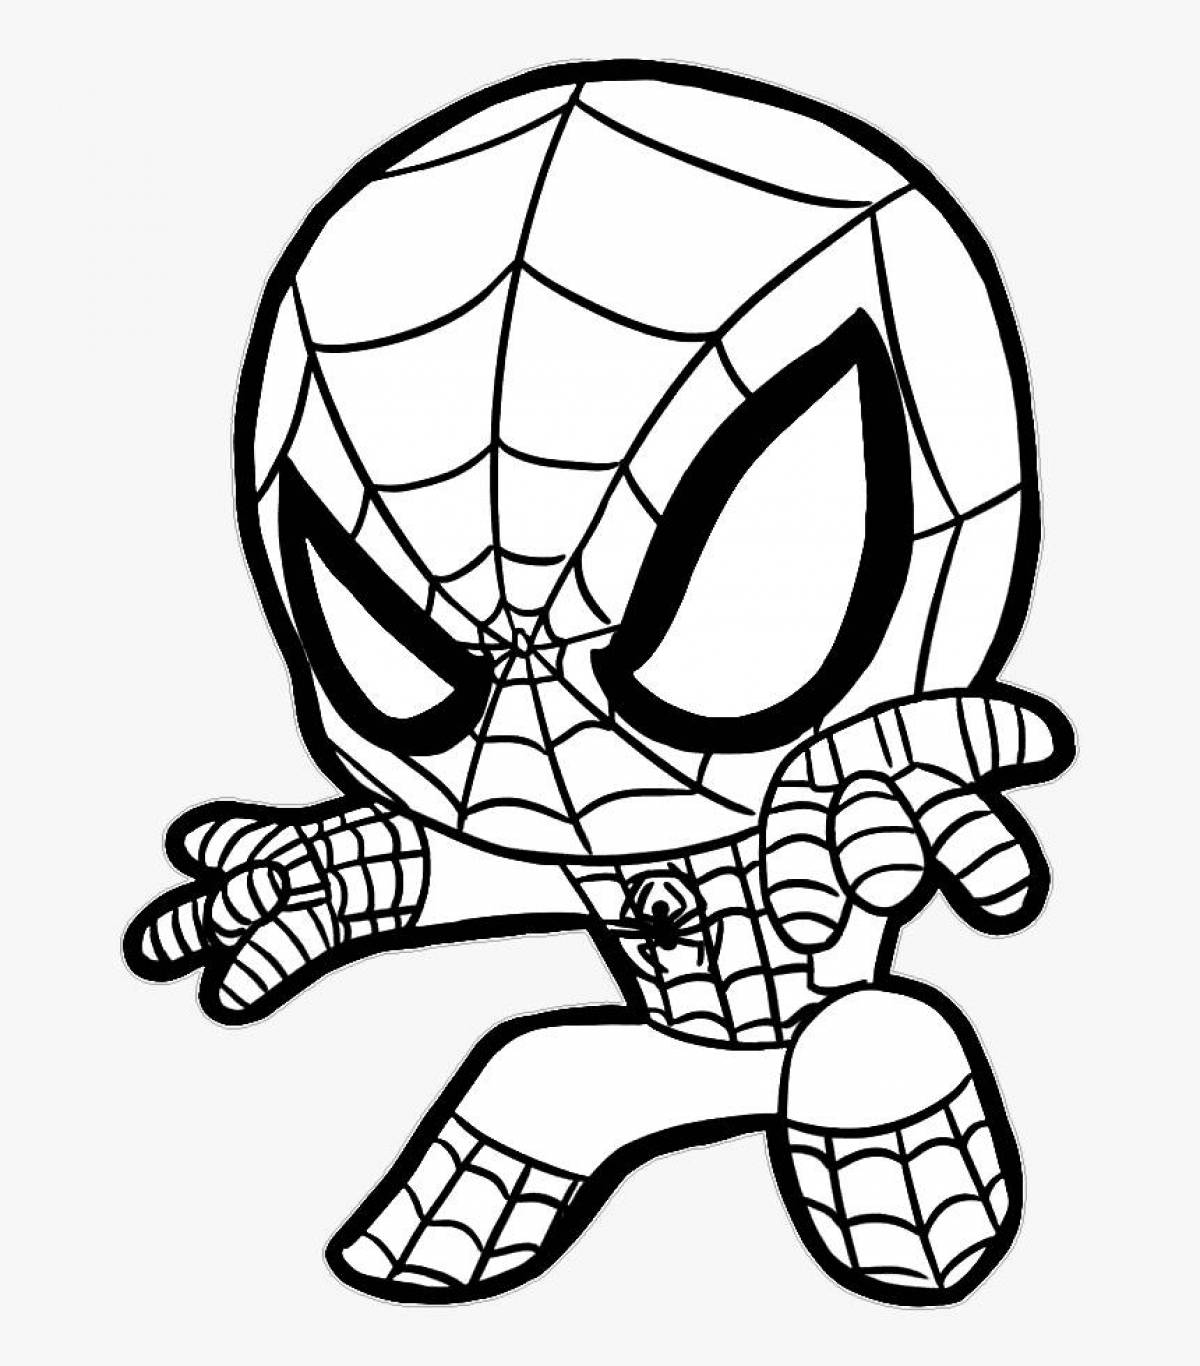 Spiderman's adorable coloring book